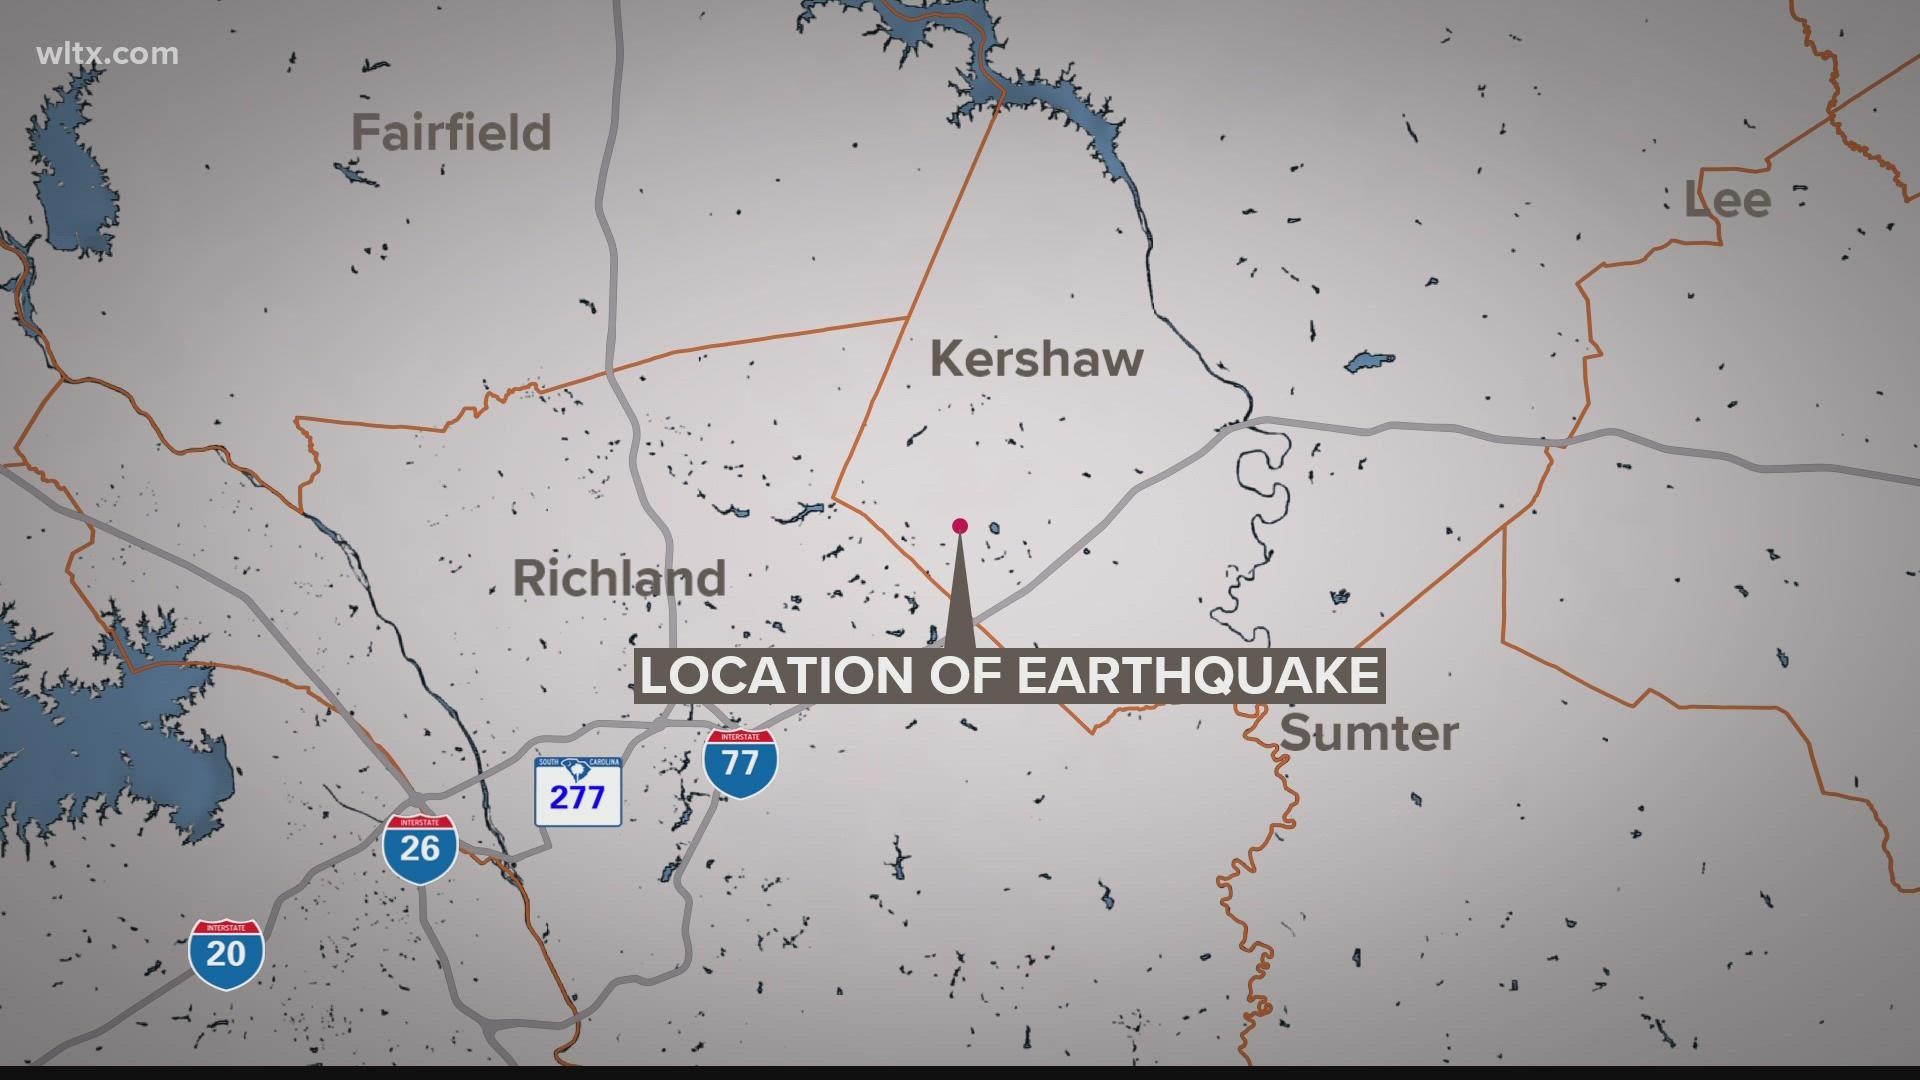 Another earthquake rattled the Elgin area Wednesday night, according to the U.S. Geological Survey (USGS). It's the 15th earthquake to shake the area since Dec. 27.